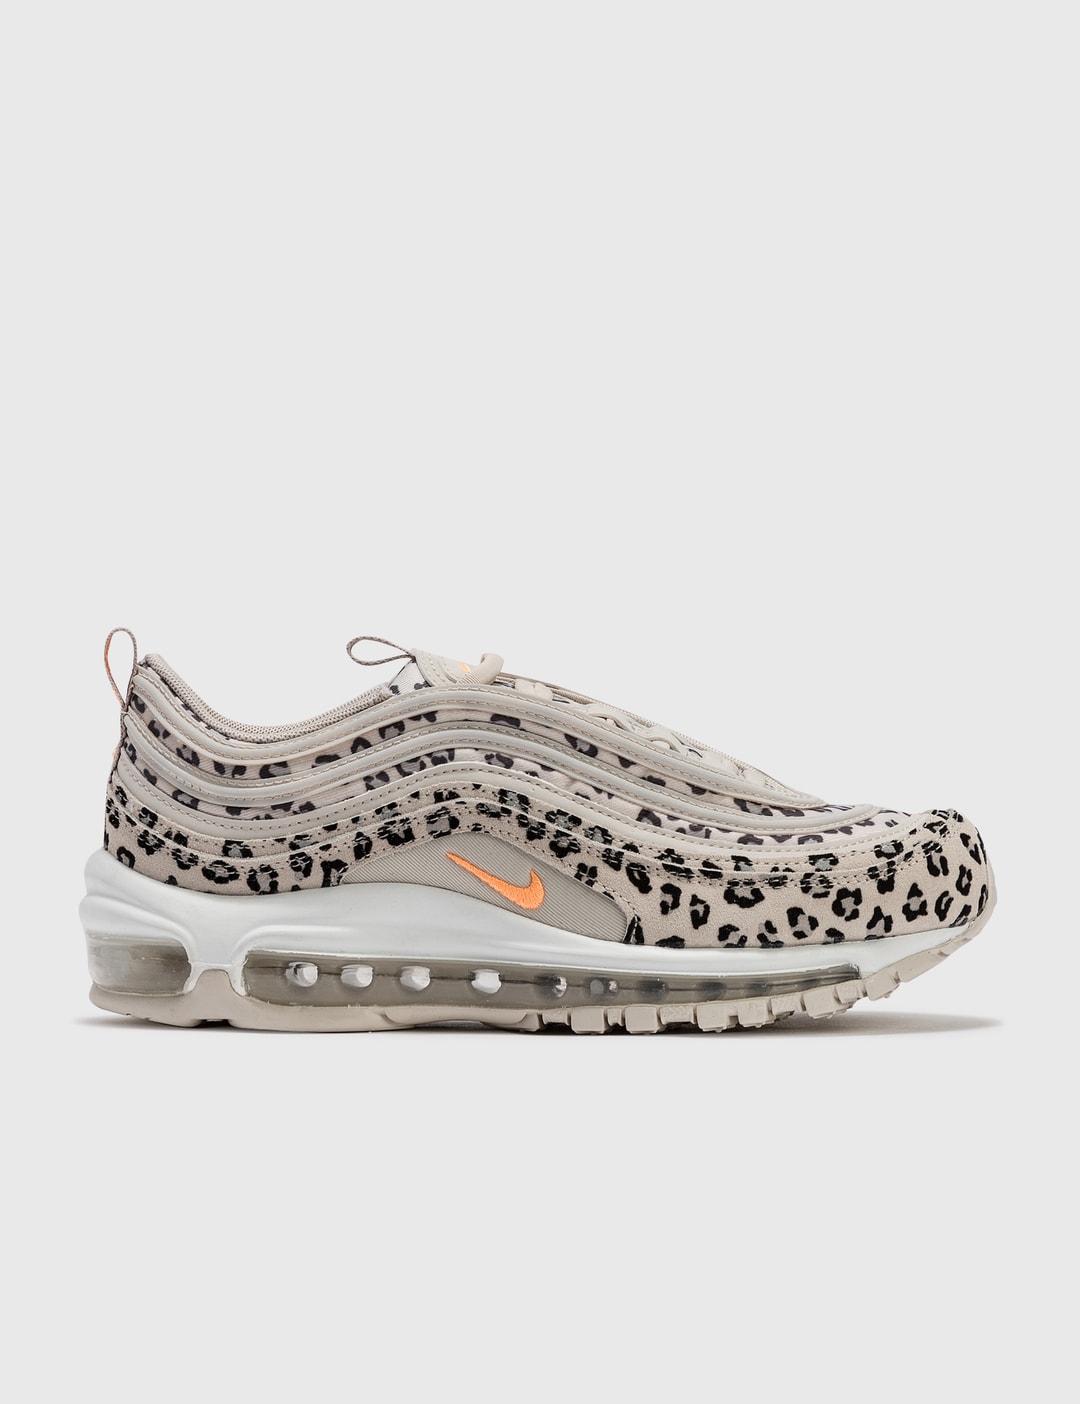 Specialist latitude Mighty Nike - Nike Air Max 97 SE | HBX - Globally Curated Fashion and Lifestyle by  Hypebeast